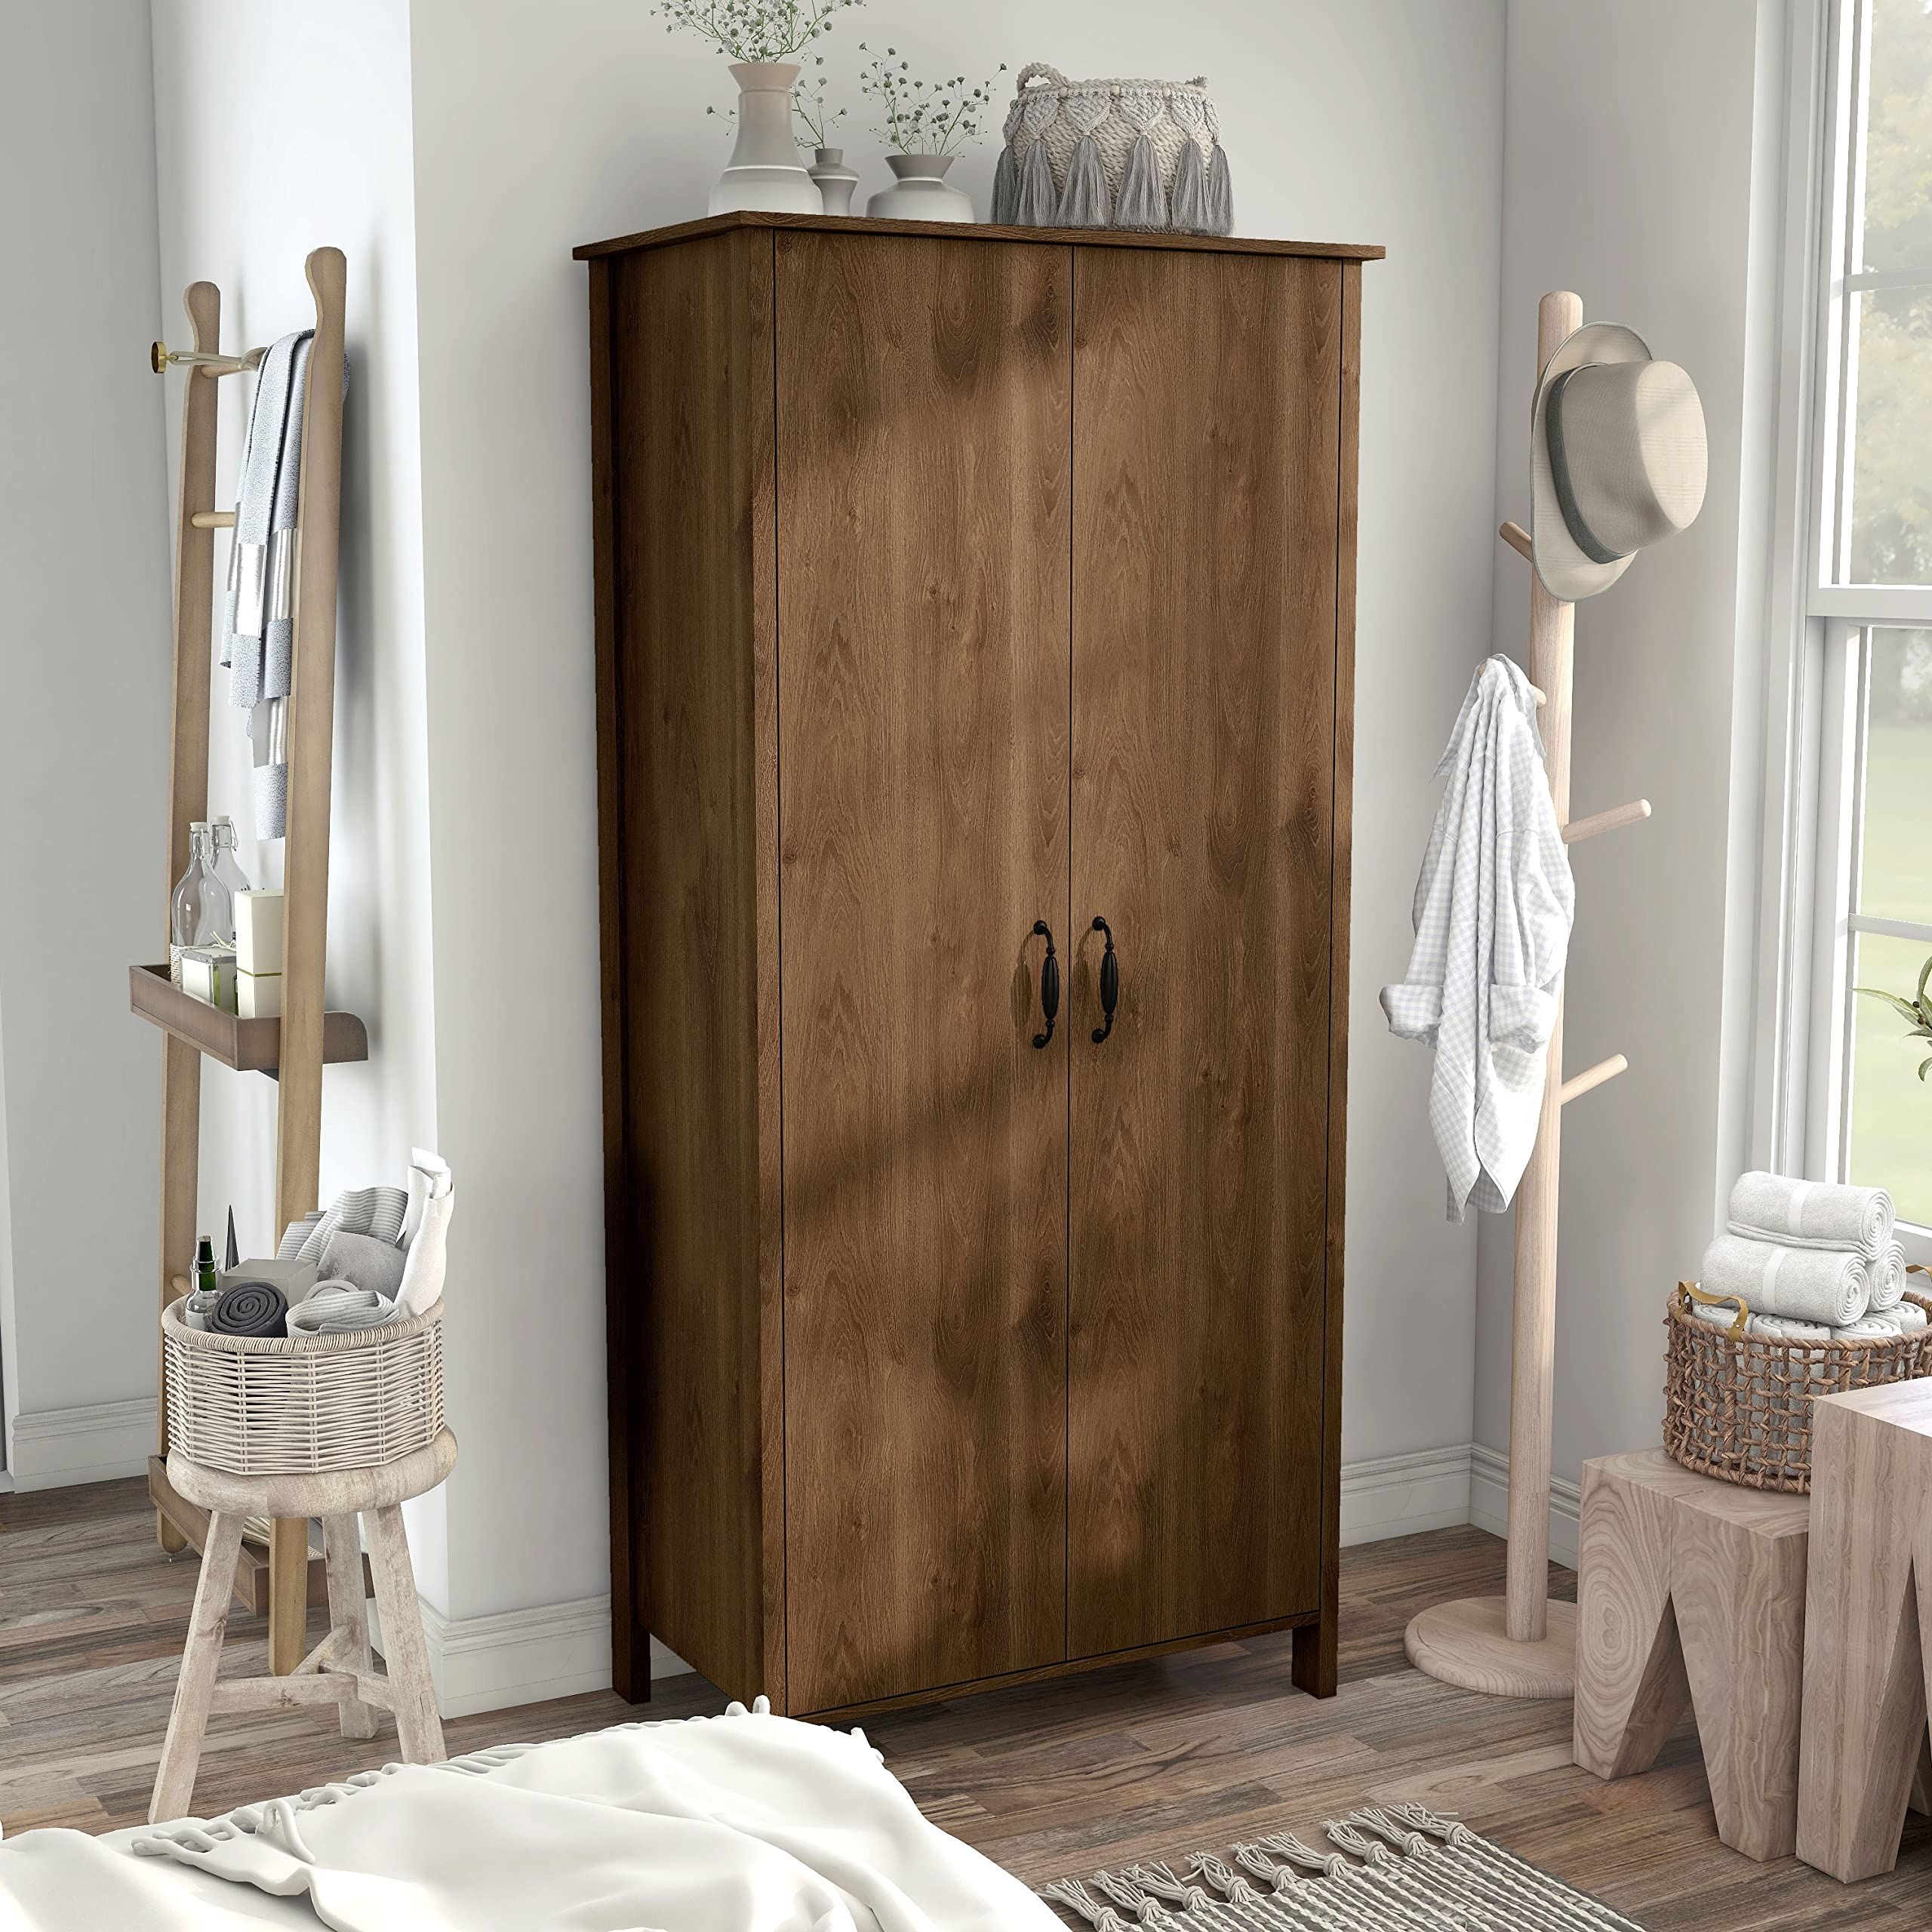 Amazon – Distressed Walnut Double Doors Wardrobe Closet With Shelves  Brown Traditional Transitional Mdf Within Popular Traditional Wardrobes (View 10 of 10)